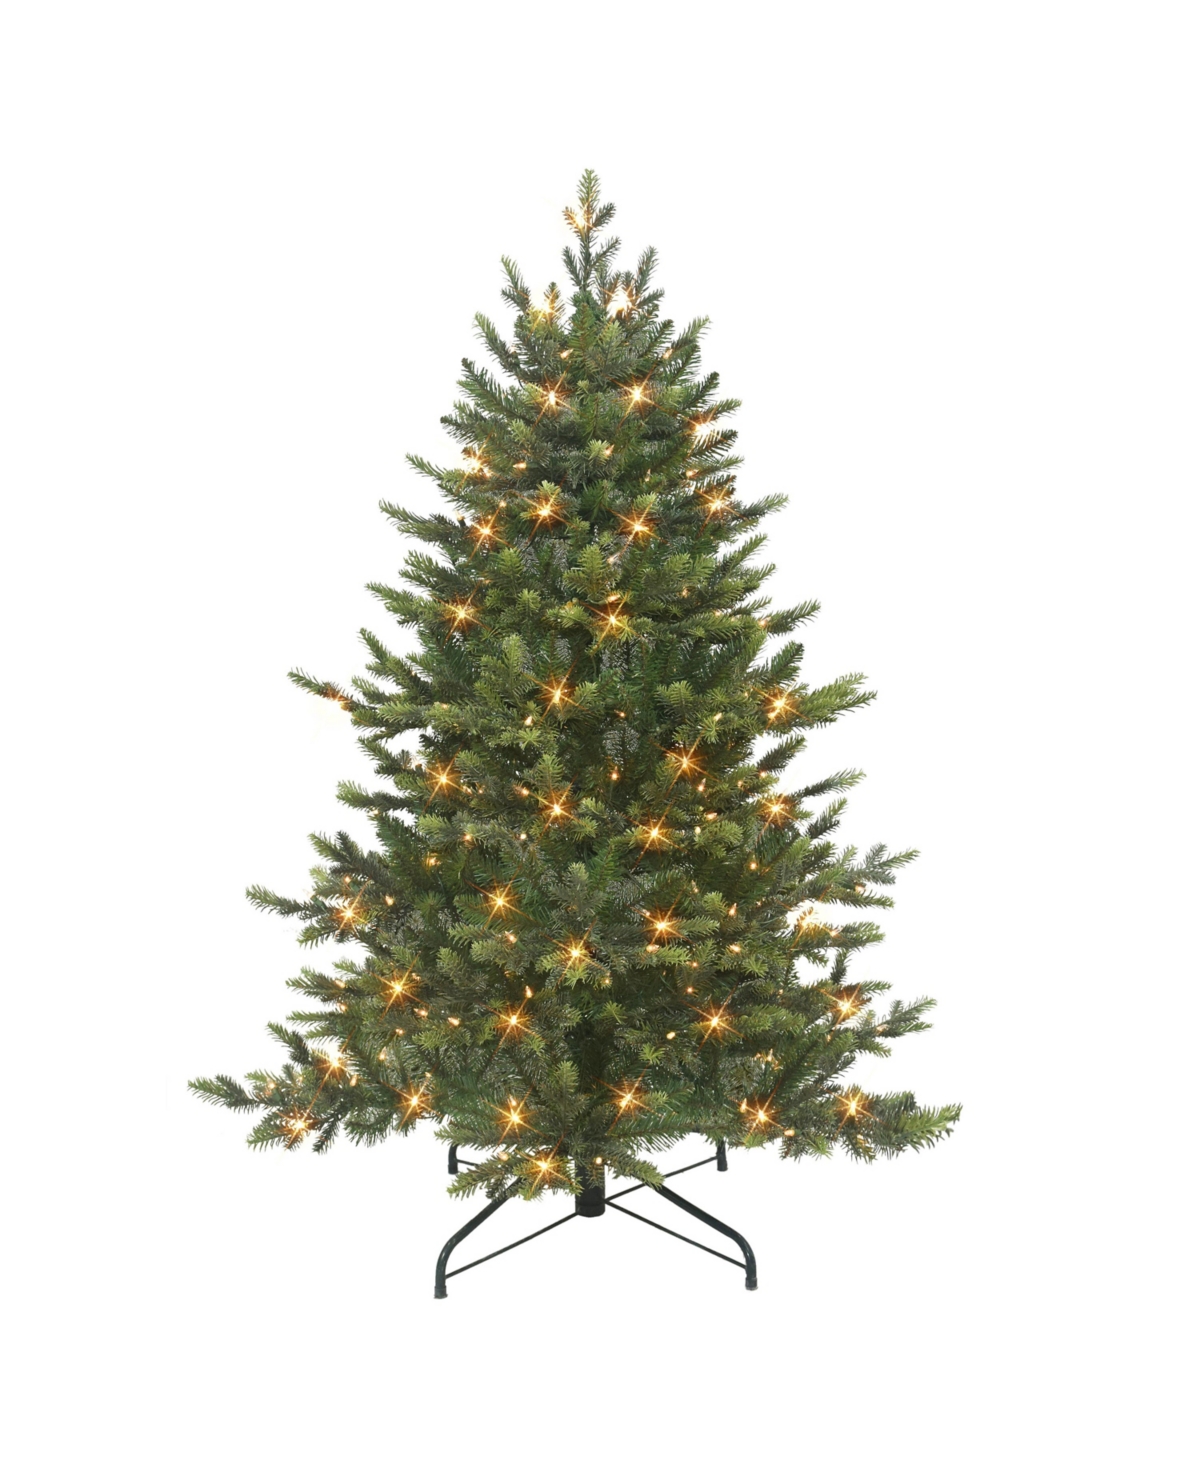 Puleo 4.5' Pre-lit Royal Majestic Douglas Fir Downswept Tree With 250 Clear Incandescent Lights In Green